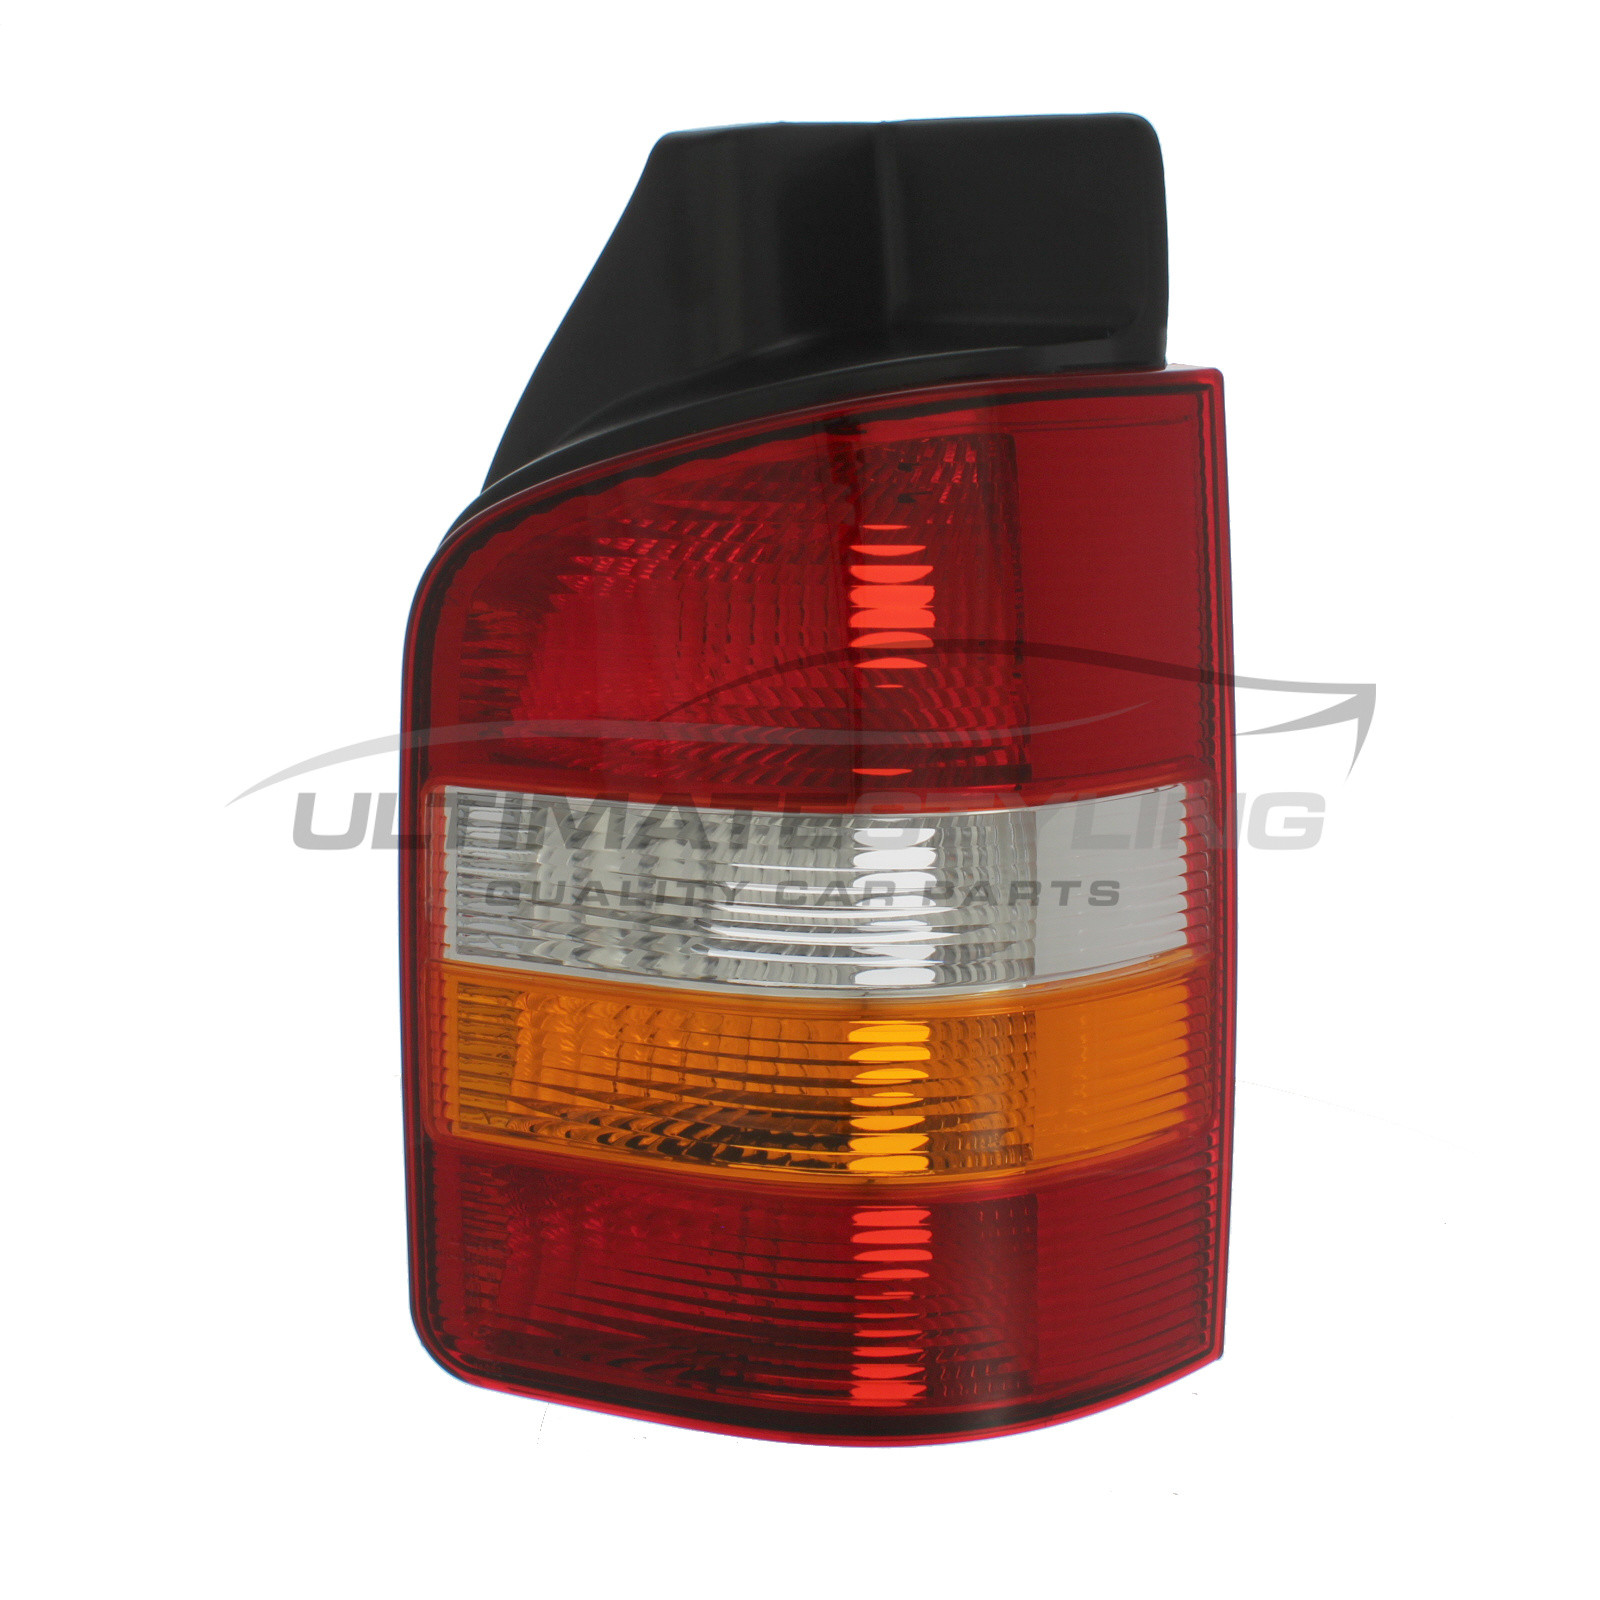 VW Transporter 2003-2010 Non-LED with Amber Indicator Rear Light / Tail Light Excluding Bulb Holder Drivers Side (RH)